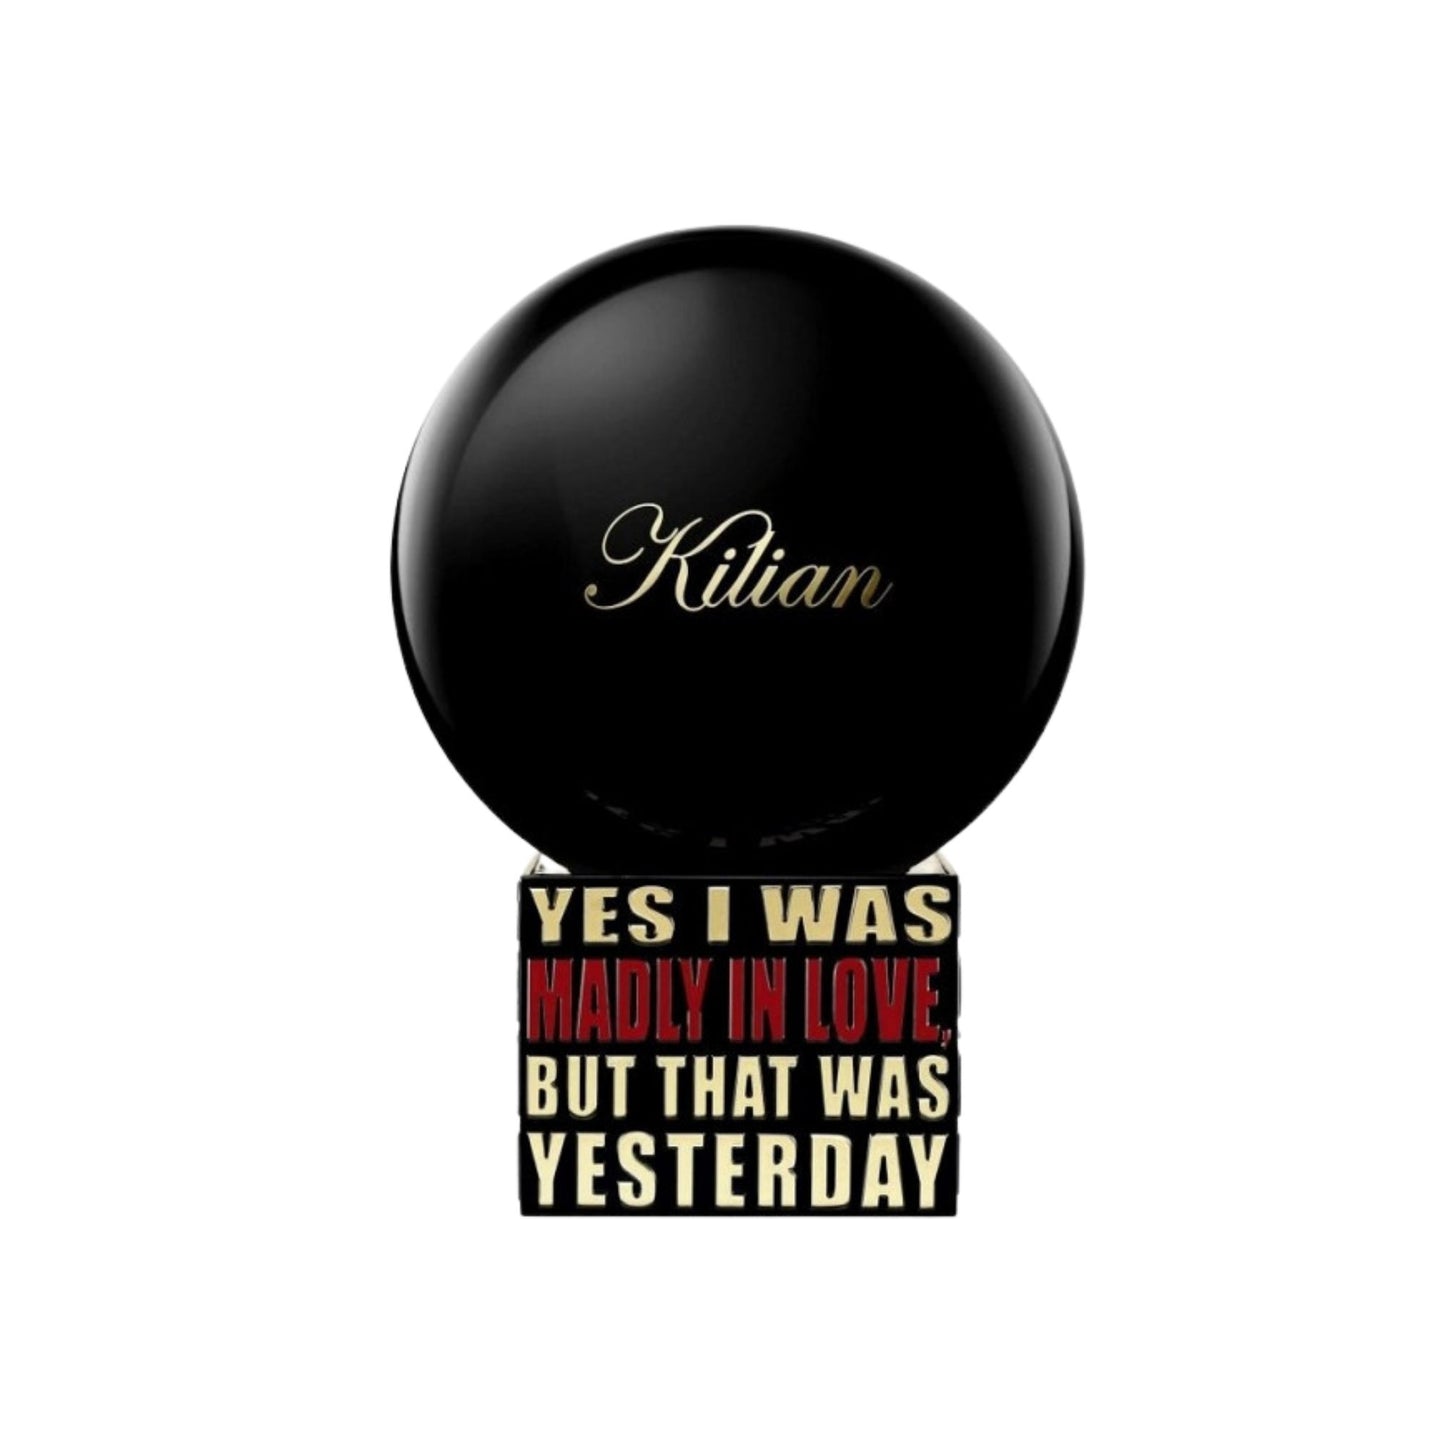 Perfume Unisex YES I WAS MADLY IN LOVE BY KILIAN 100ml EDP